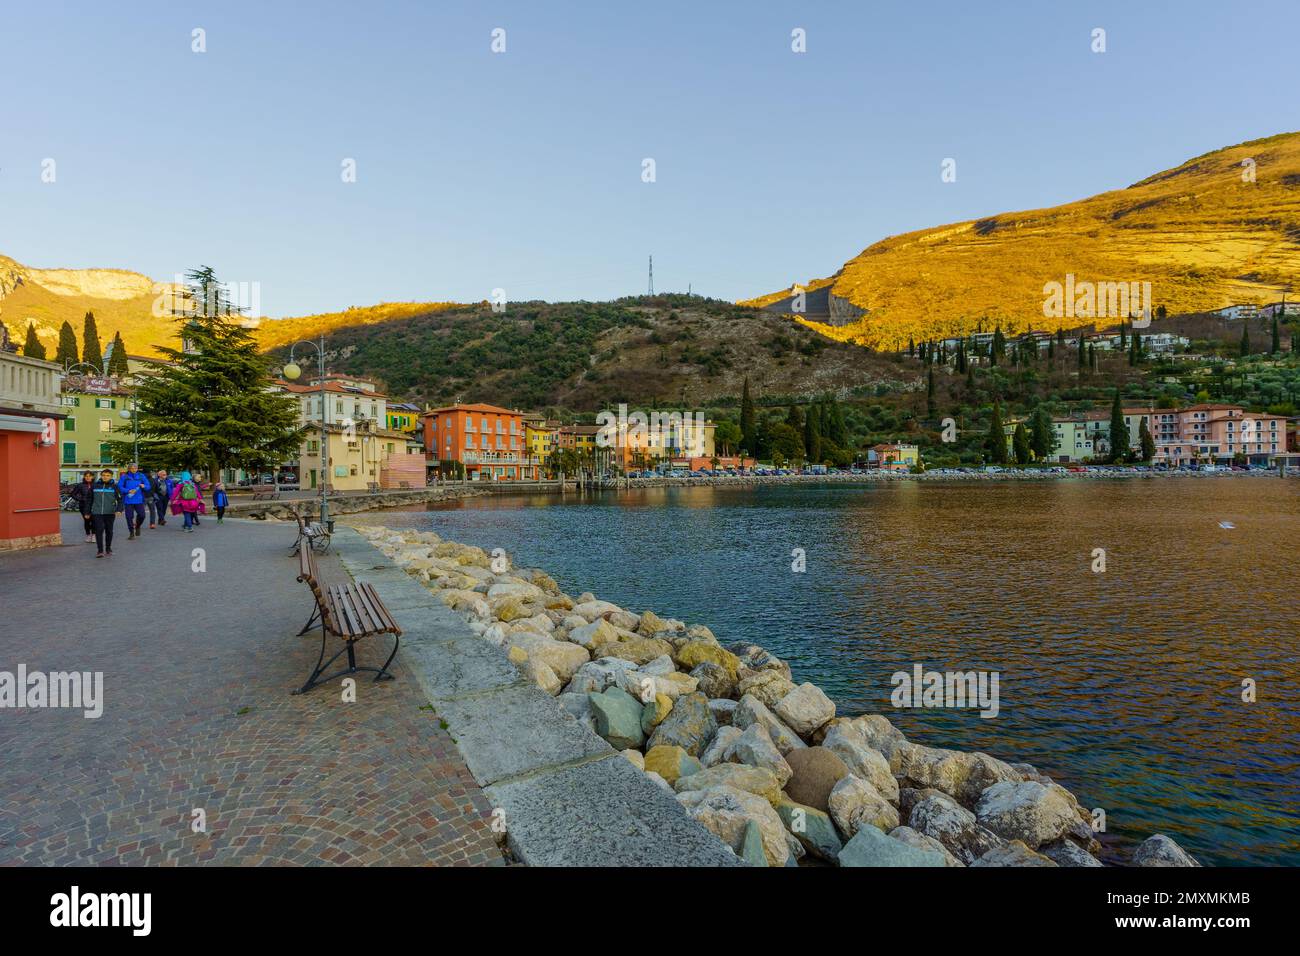 Nago–Torbole, Italy - February 26, 2022: View of the north shore of Lake Garda, with locals and visitors, on a clear winter day, in Nago–Torbole, Tren Stock Photo